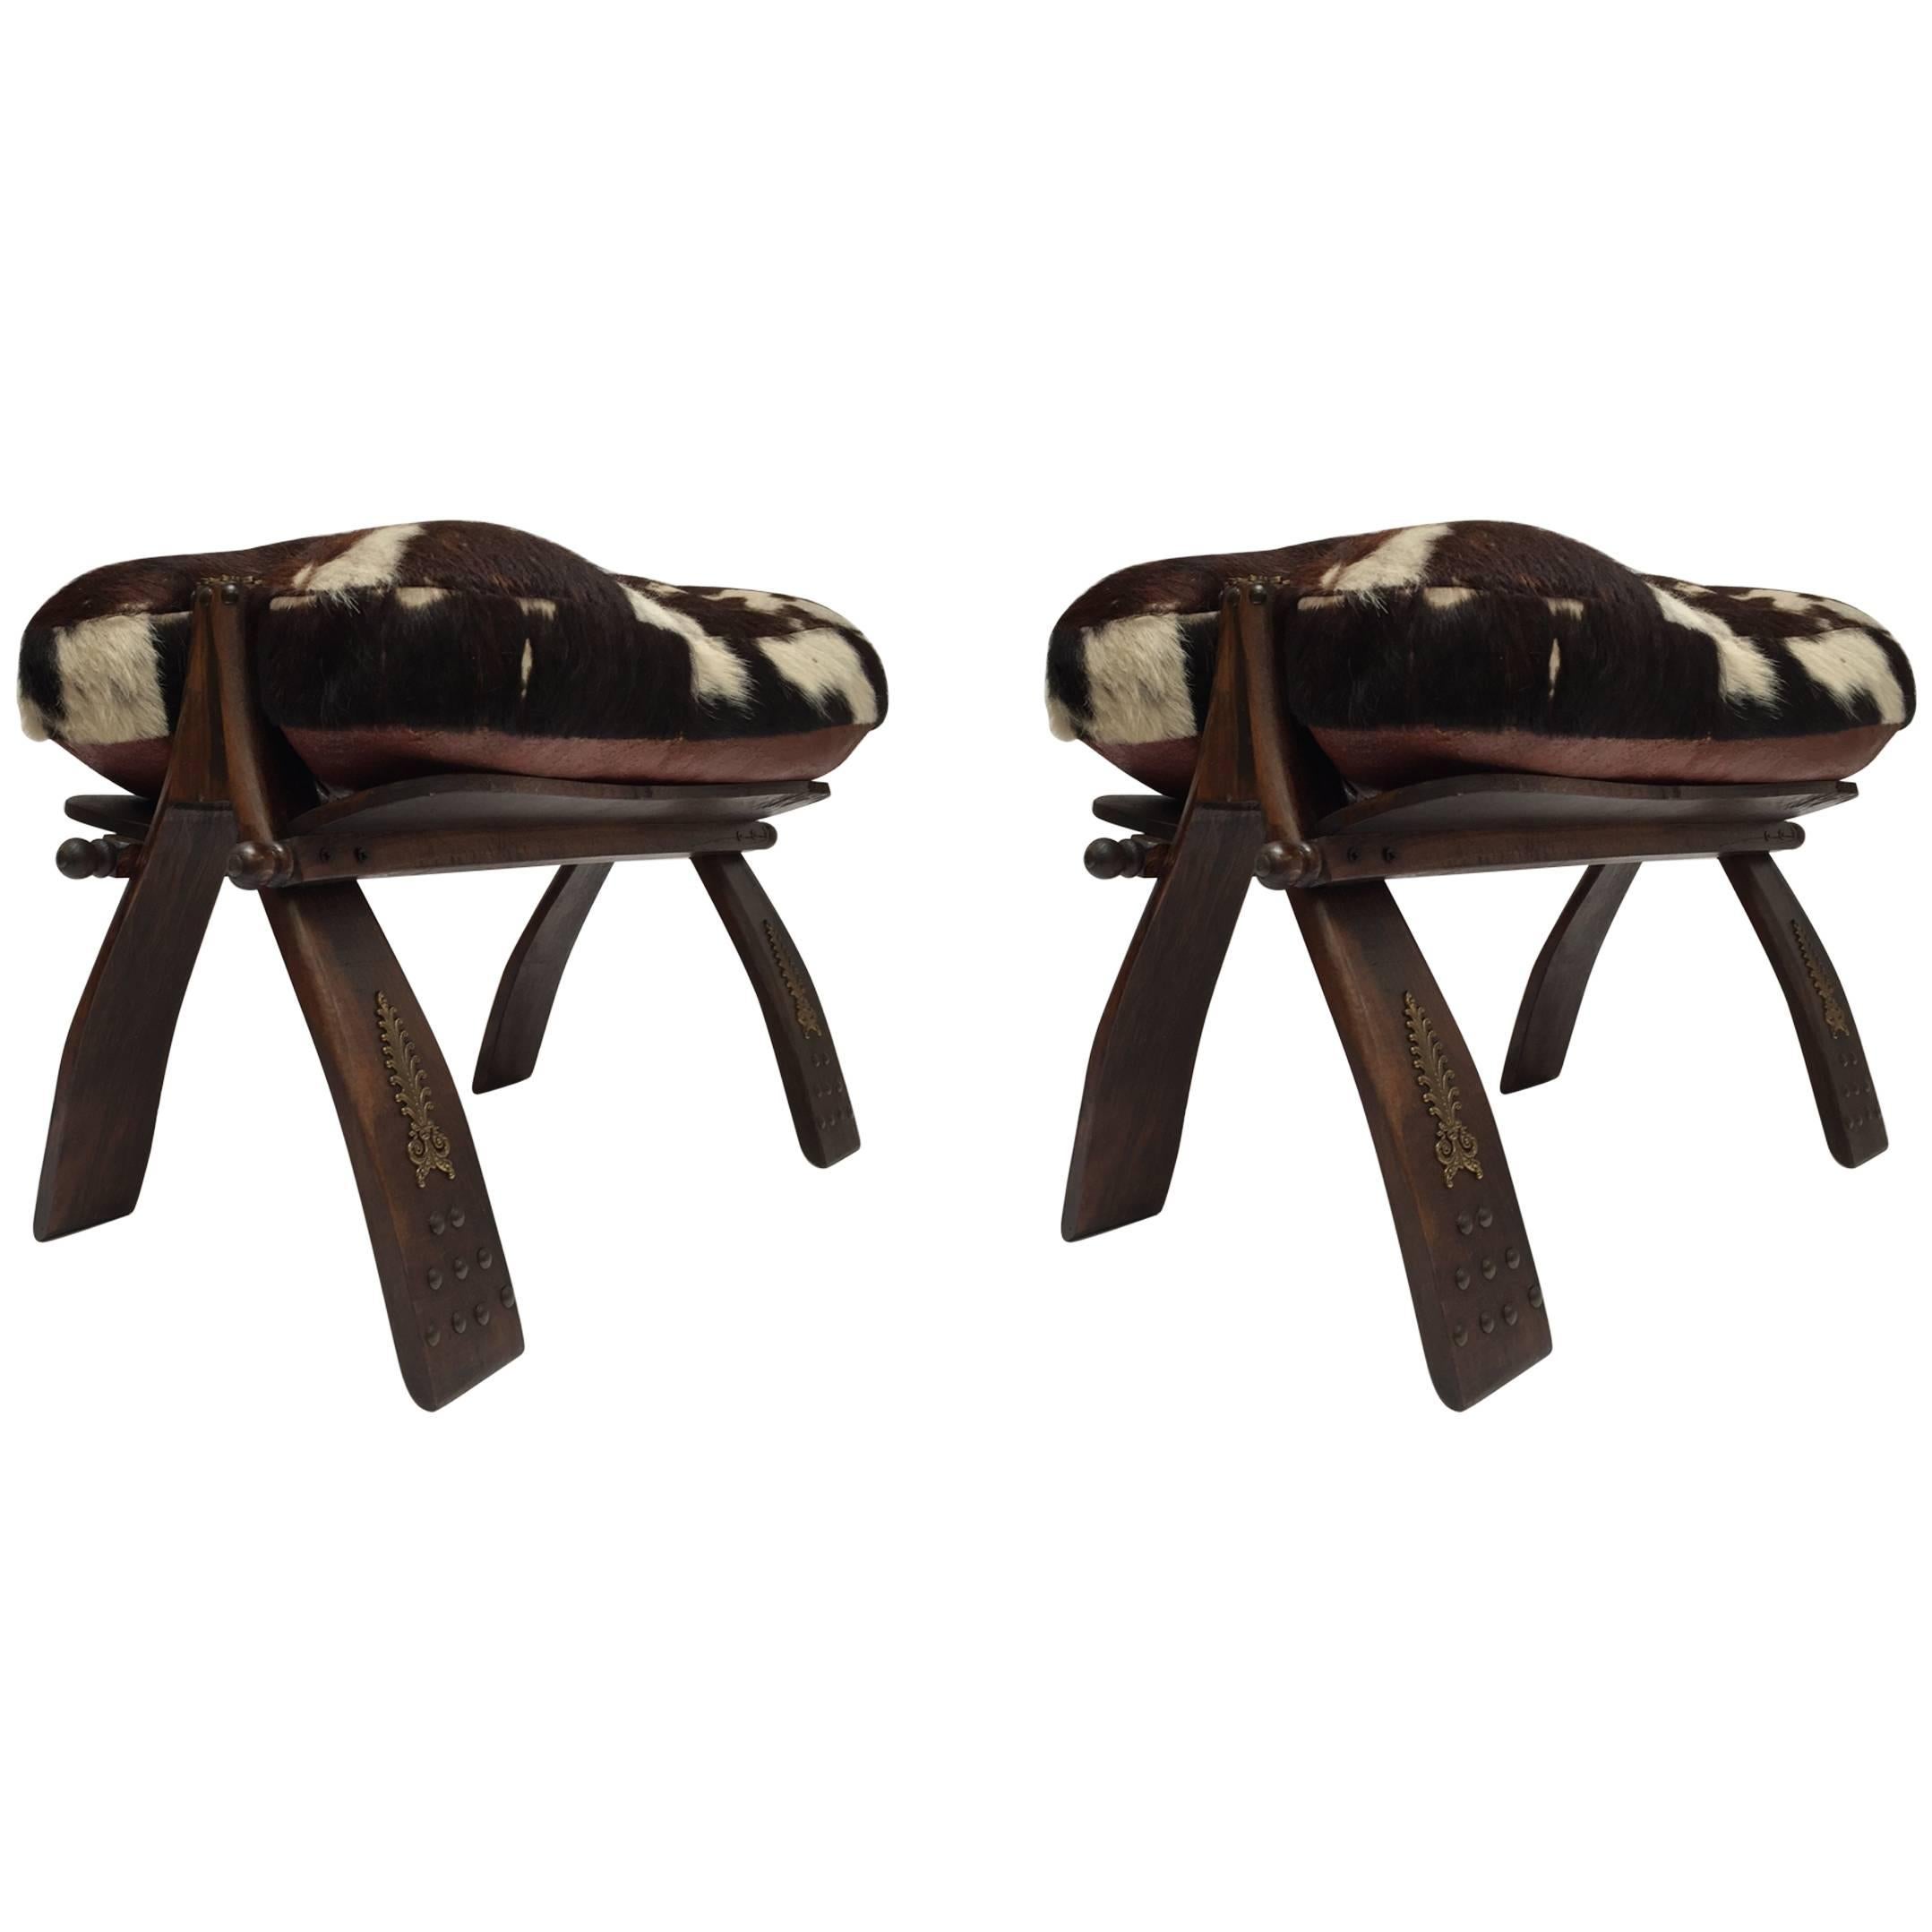 Pair of Camel Saddle Seat Footstools with Cowhide Cushions